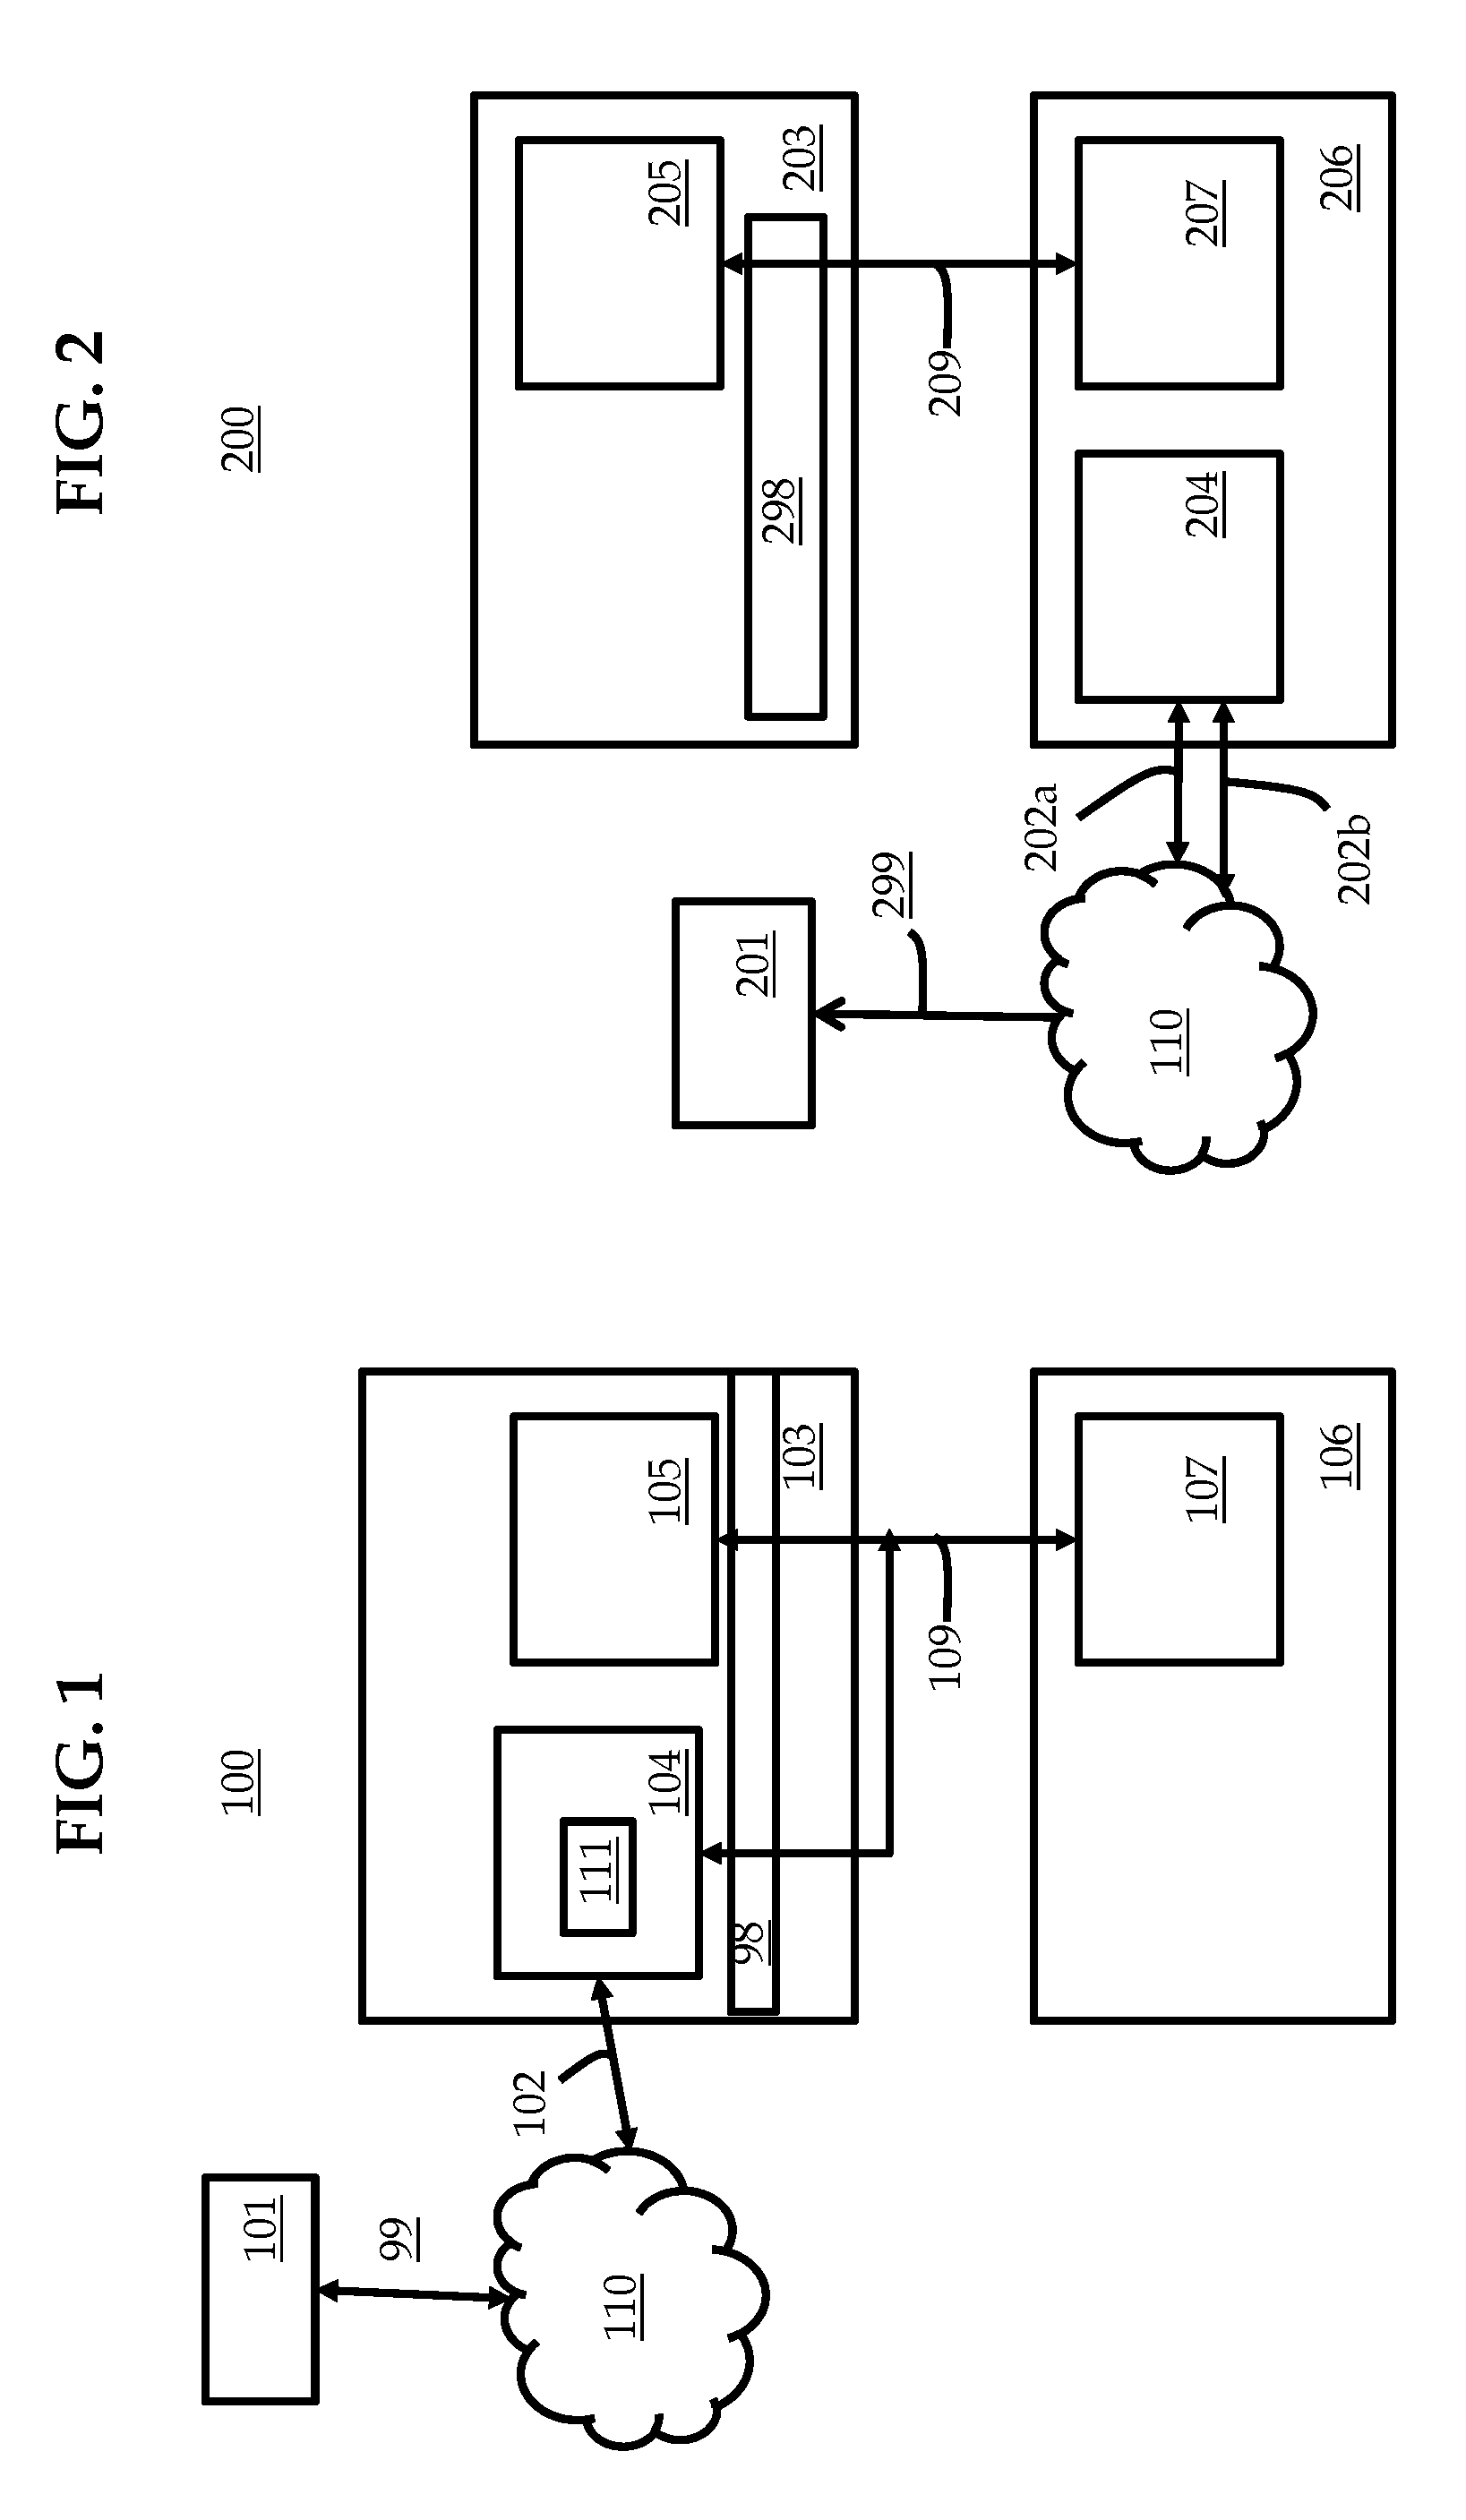 System and method for assuring quality real-time communication experience in virtual machine